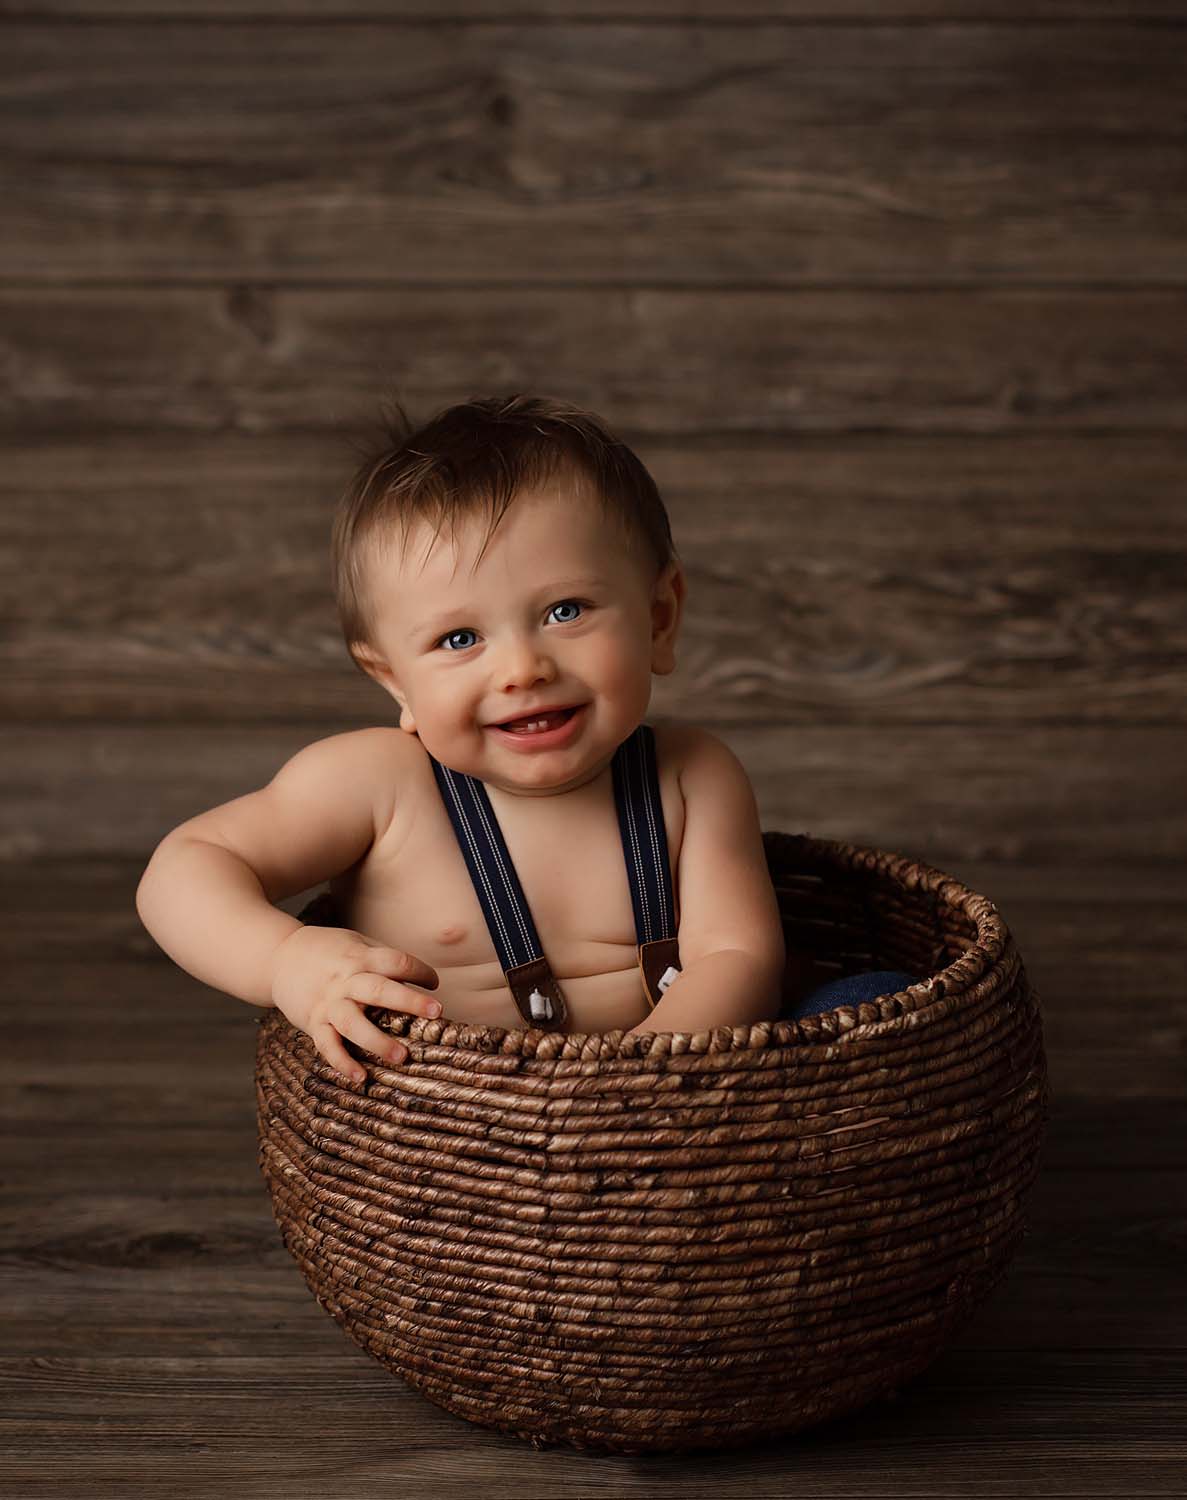 6 month old baby photographed inside a basket bowl in miami, fl